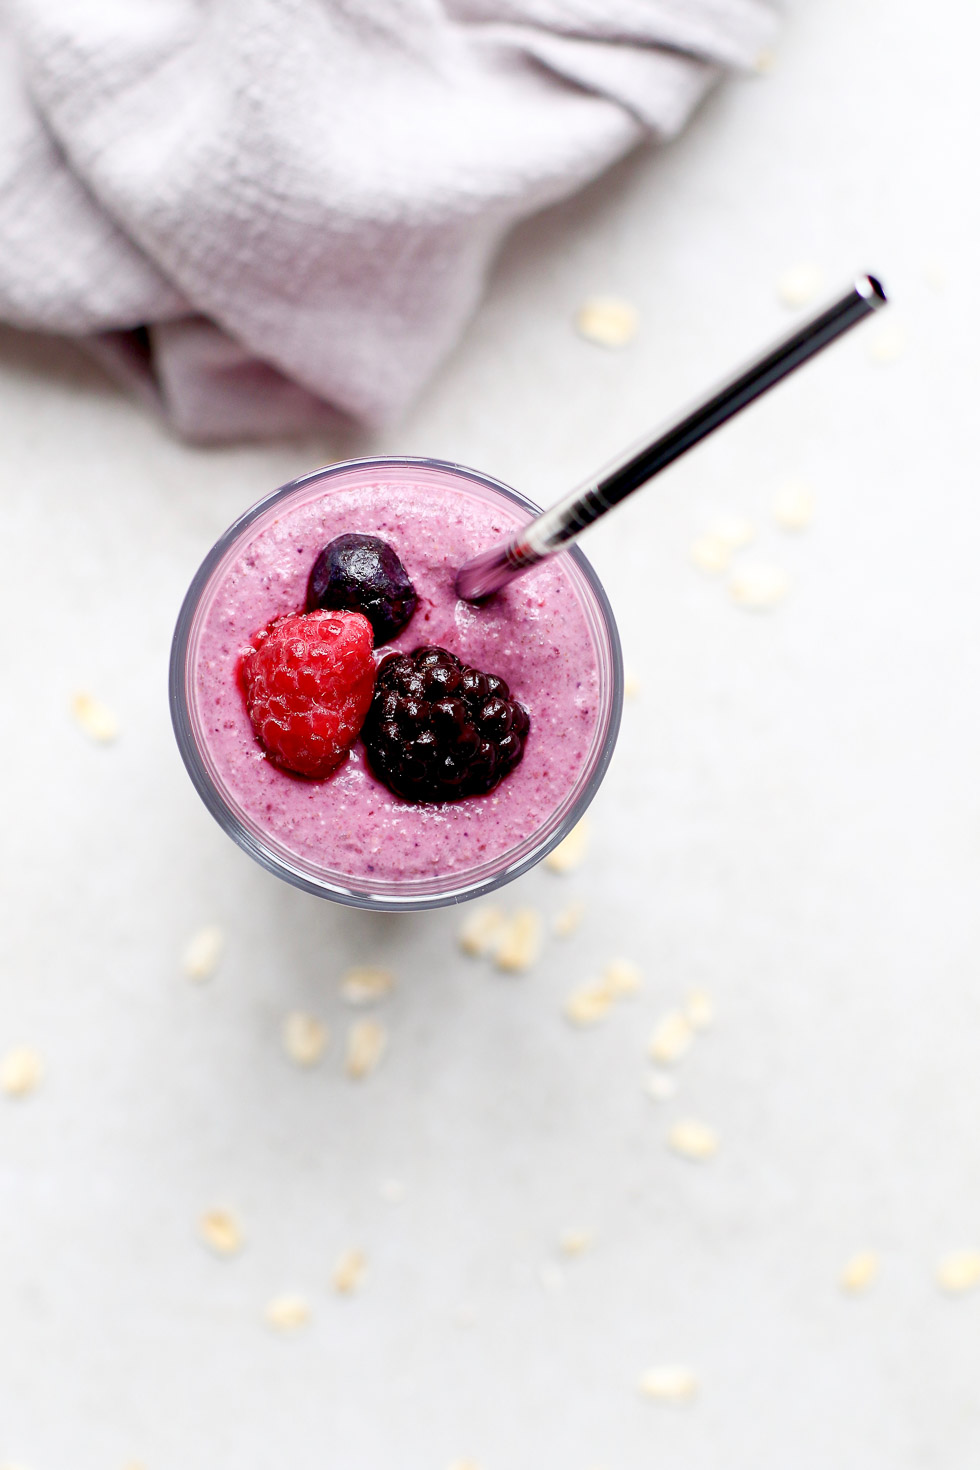 Triple Berry Hemp Smoothie with berries on top and oats around.